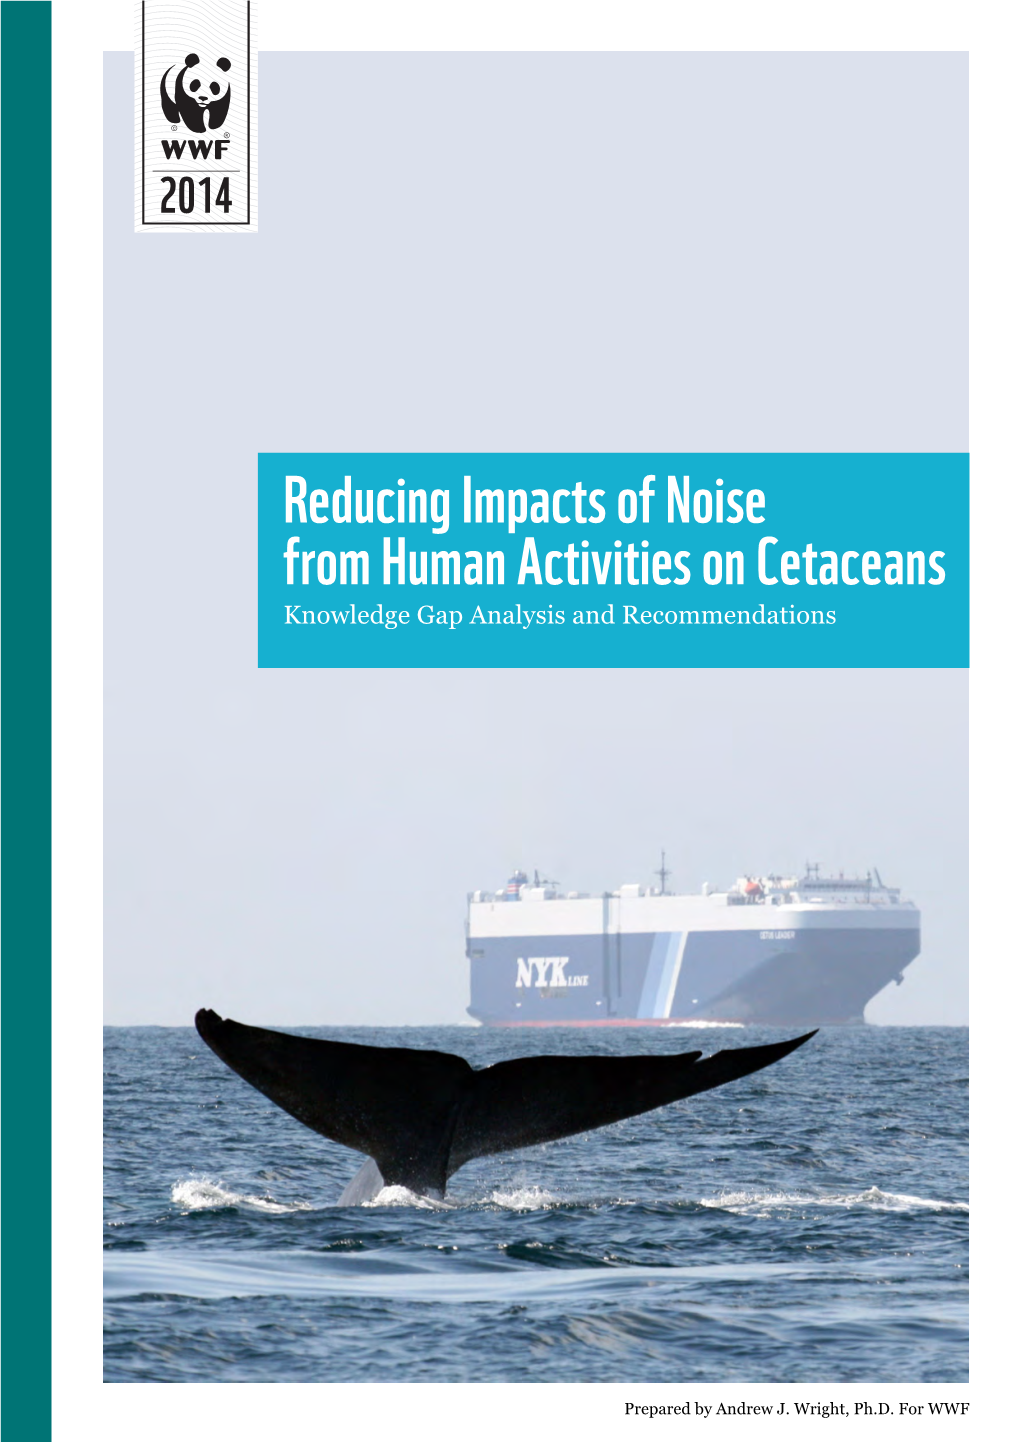 Reducing Impacts of Noise from Human Activities on Cetaceans Knowledge Gap Analysis and Recommendations